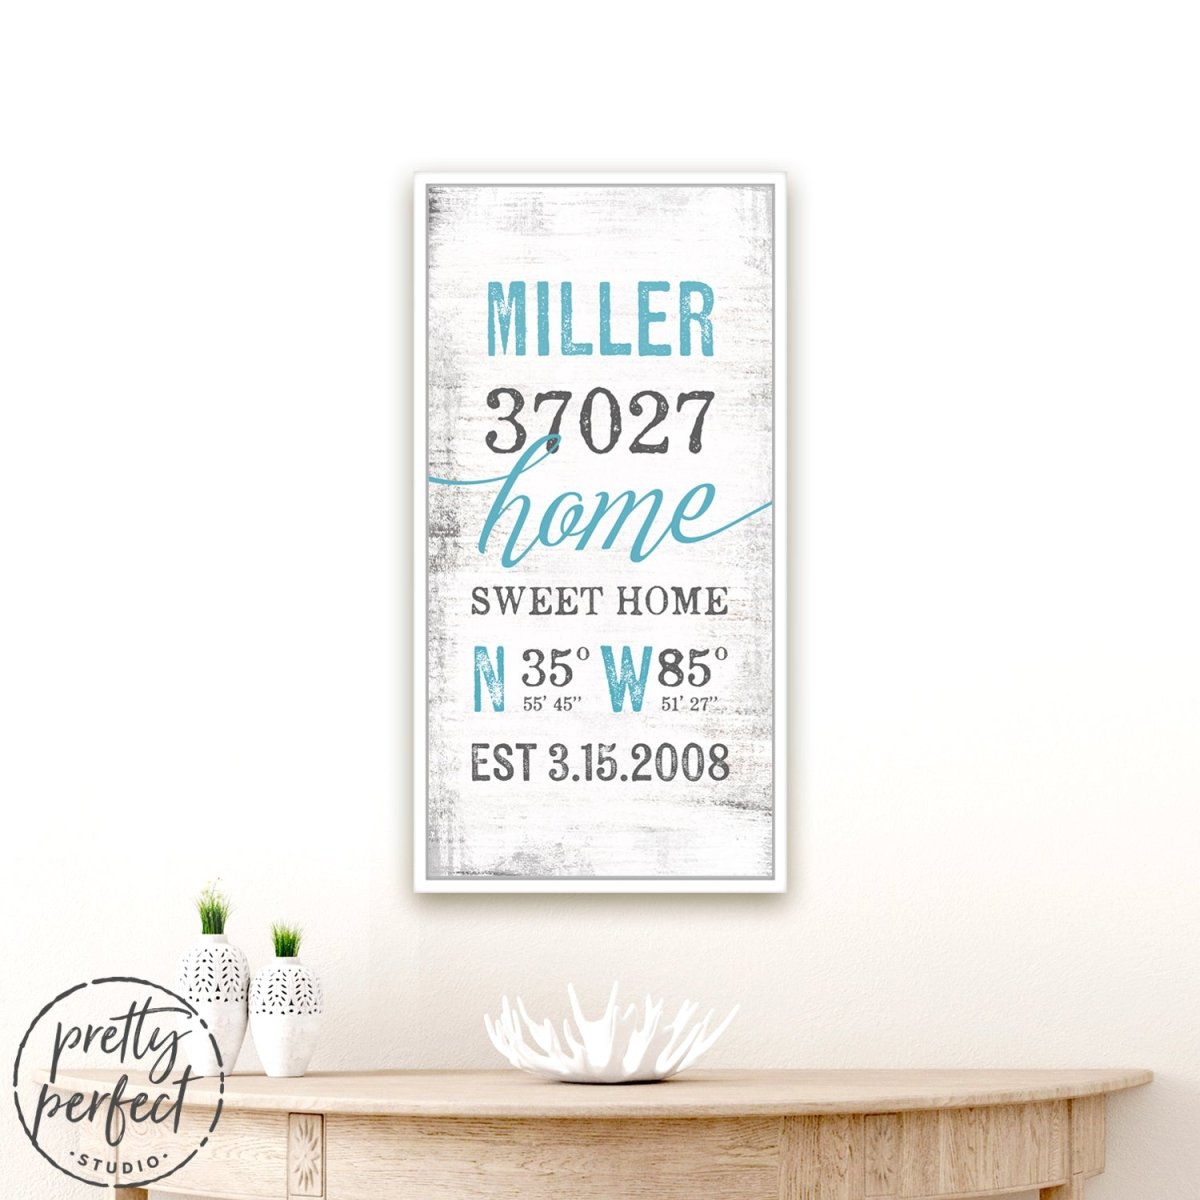 Home Sweet Home Latitude Longitude Sign Above Entryway Table - Pretty Perfect Studio